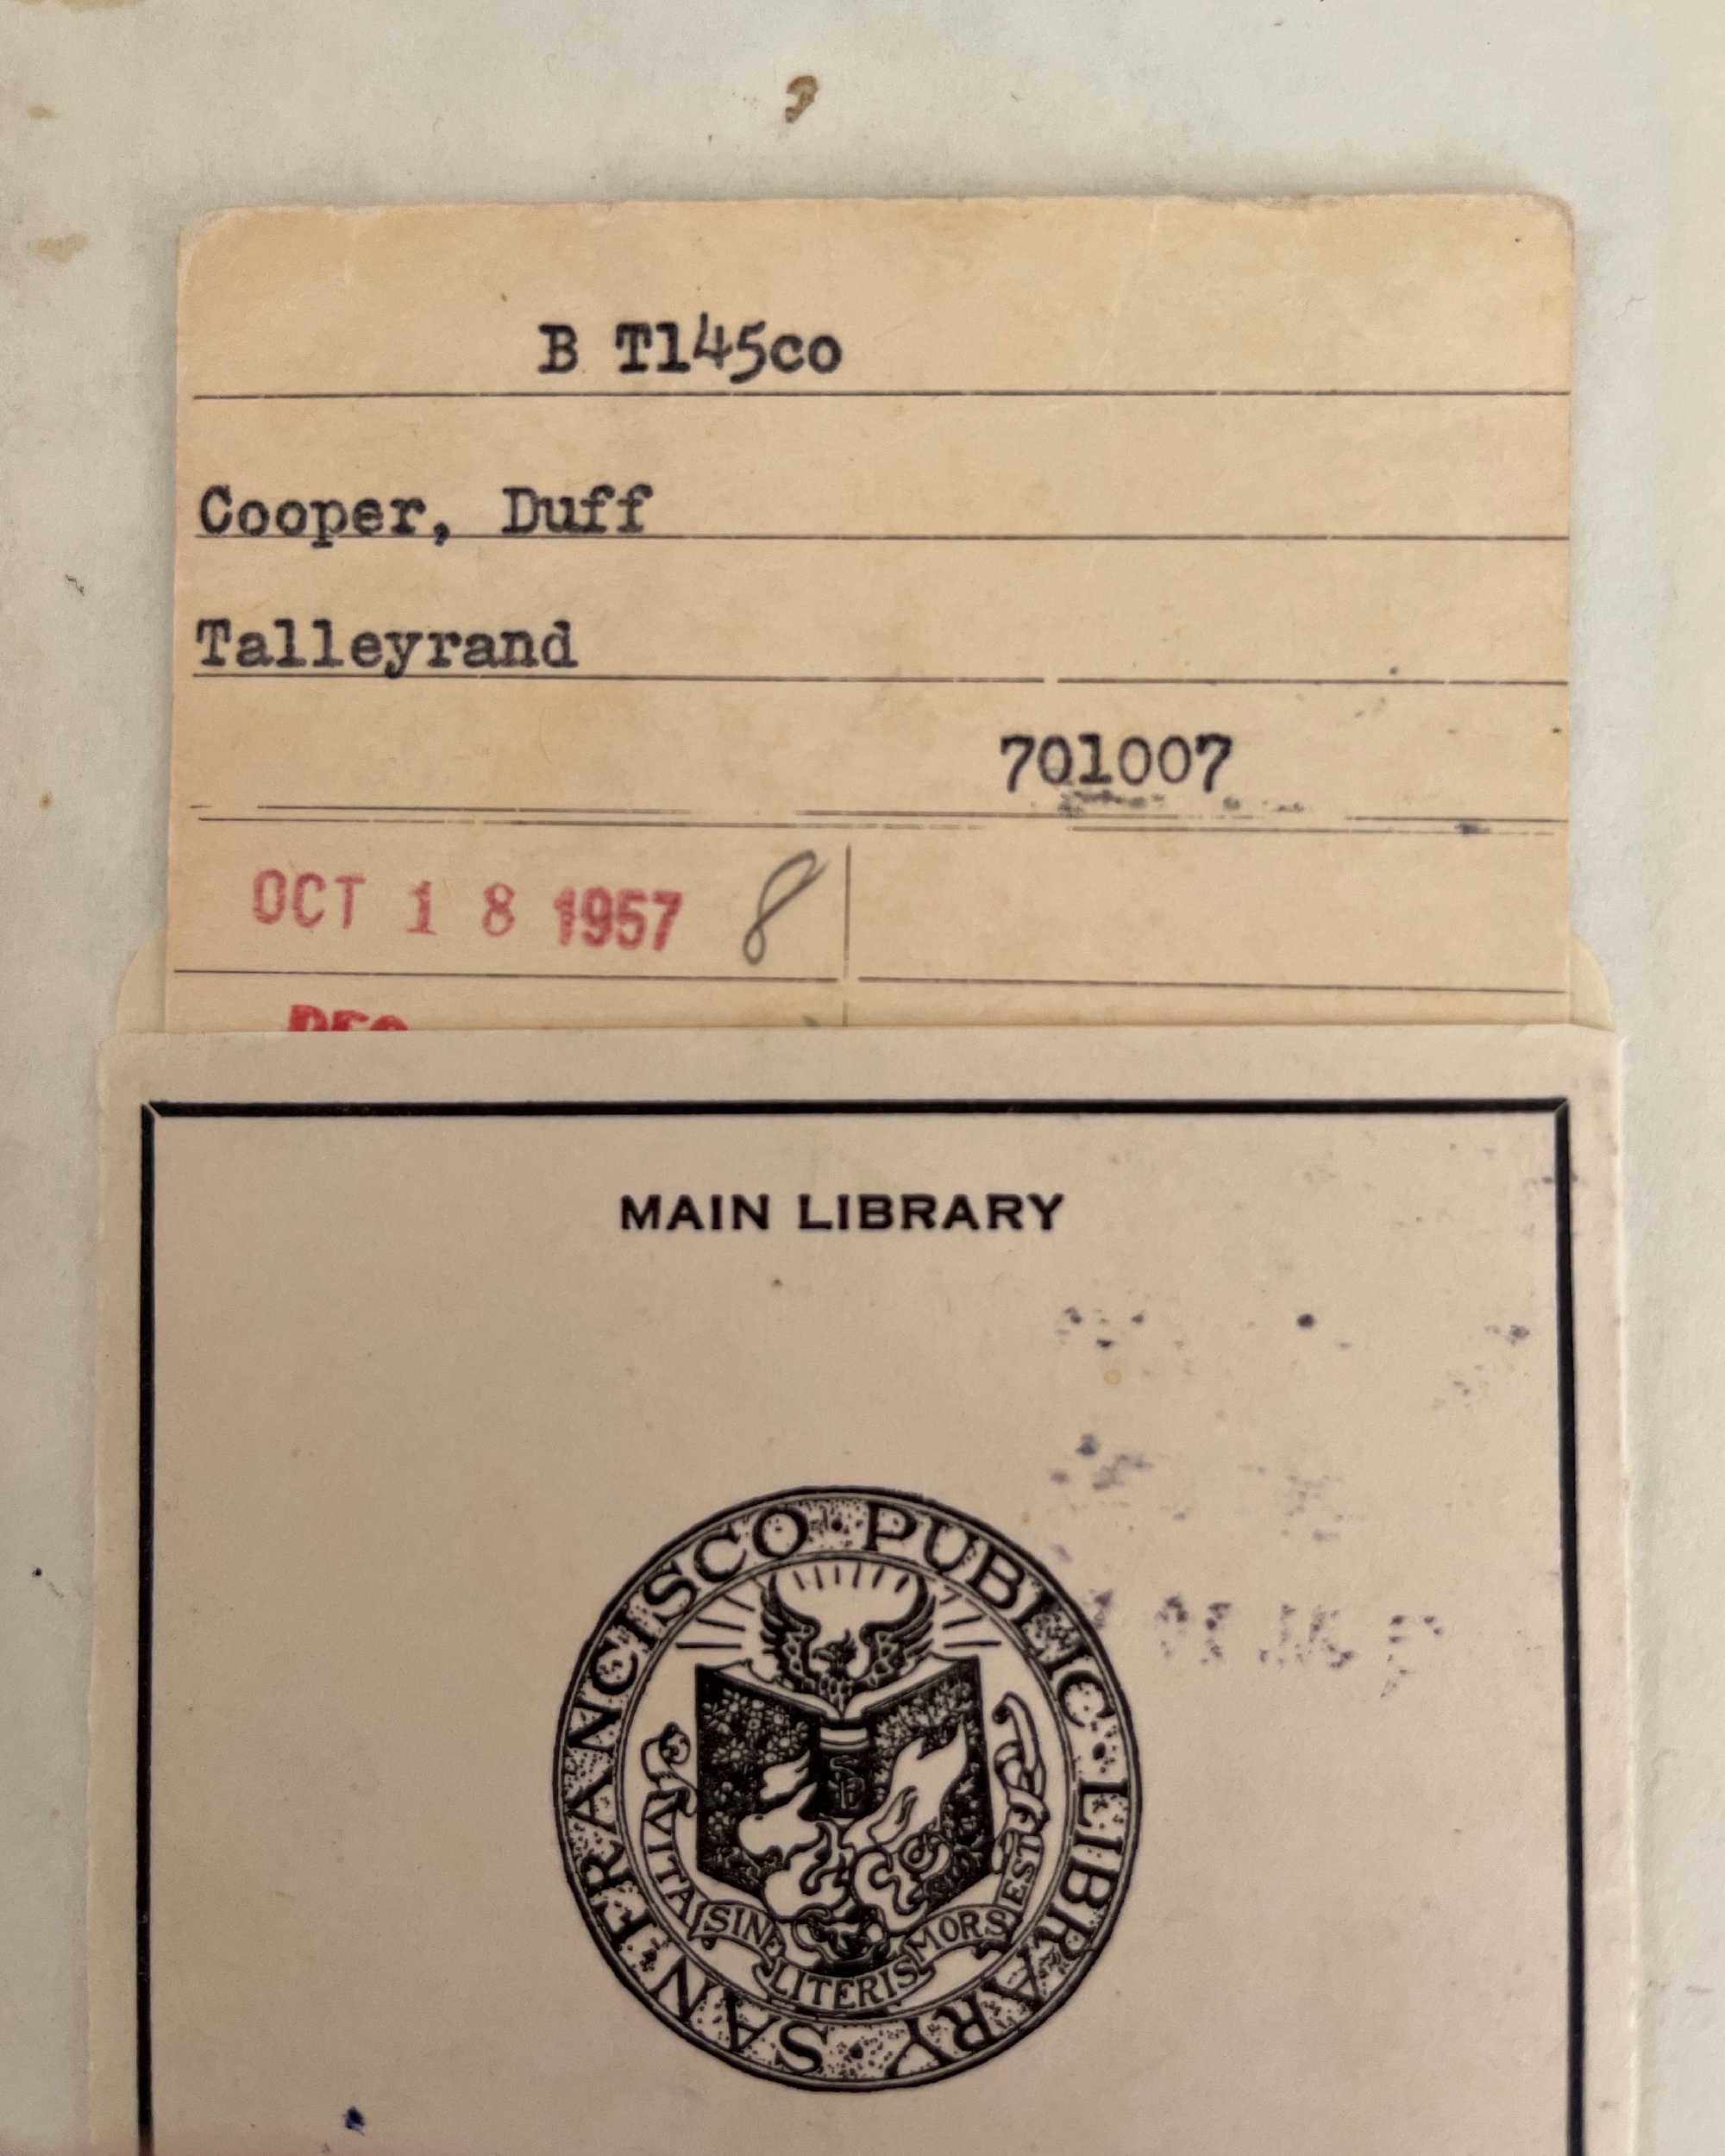 San Francisco Public Library checkout card for Talleyrand by Duff Cooper